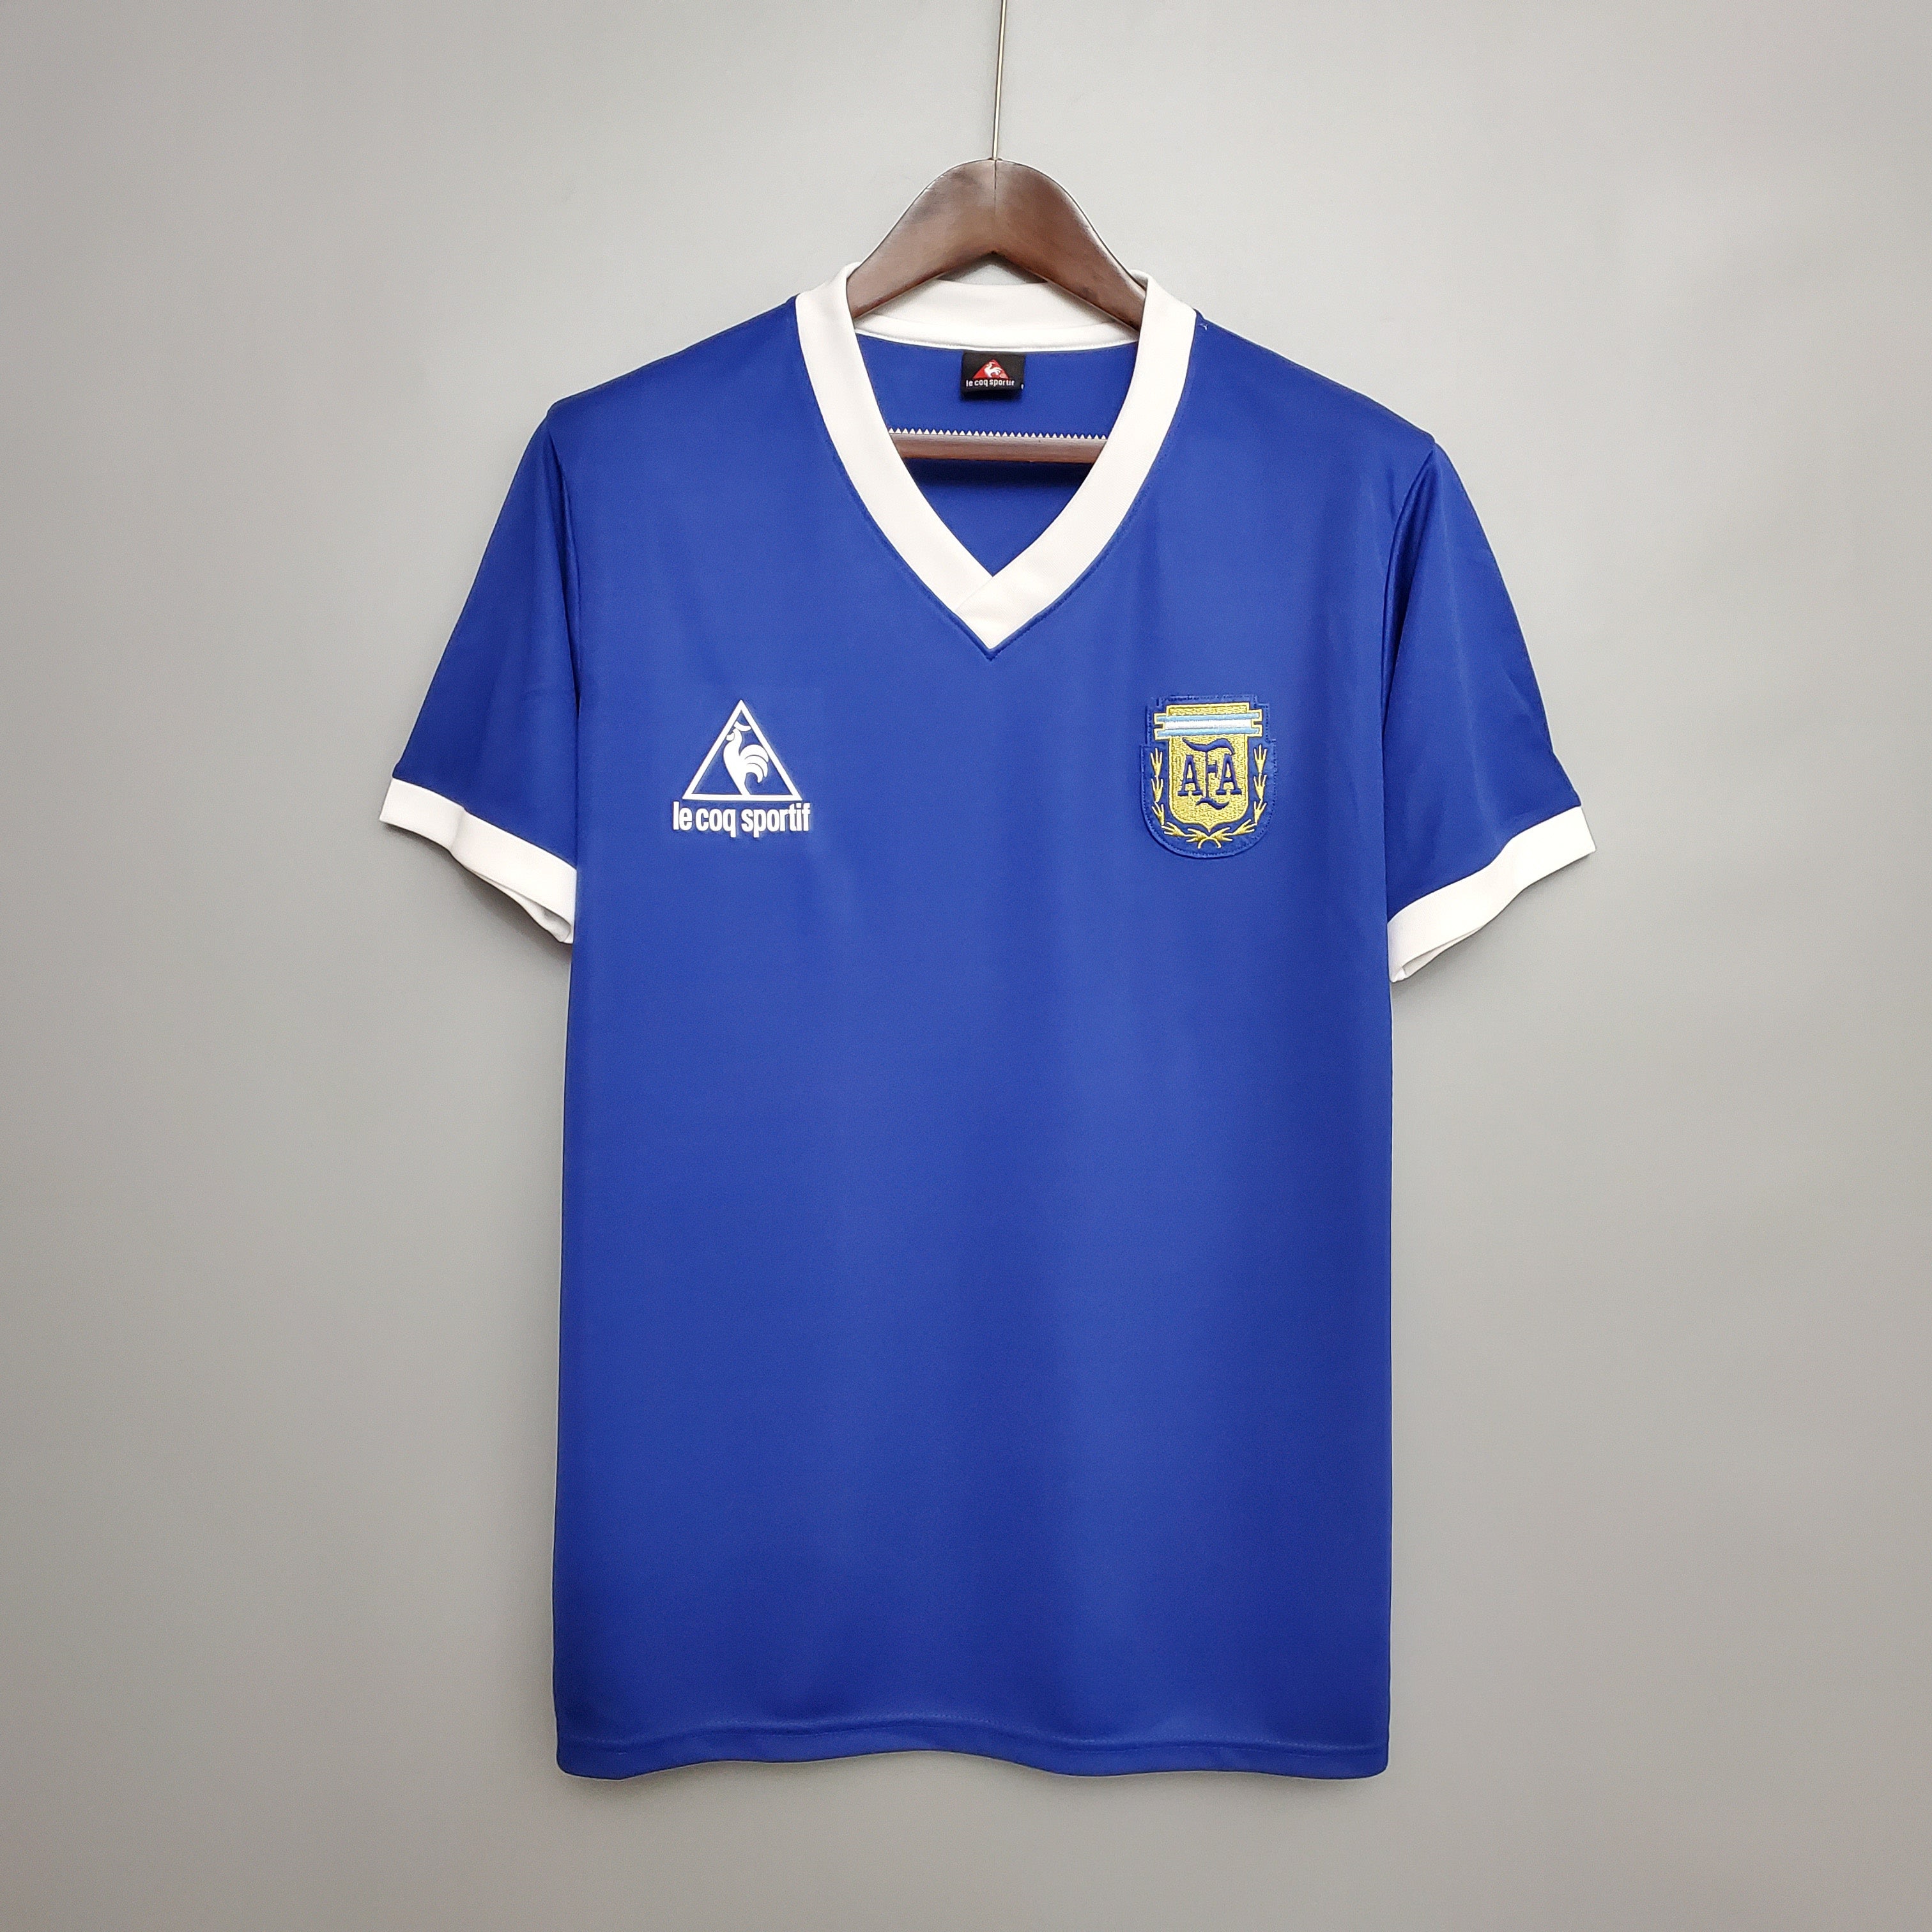 argentina soccer jersey 1986 world cup